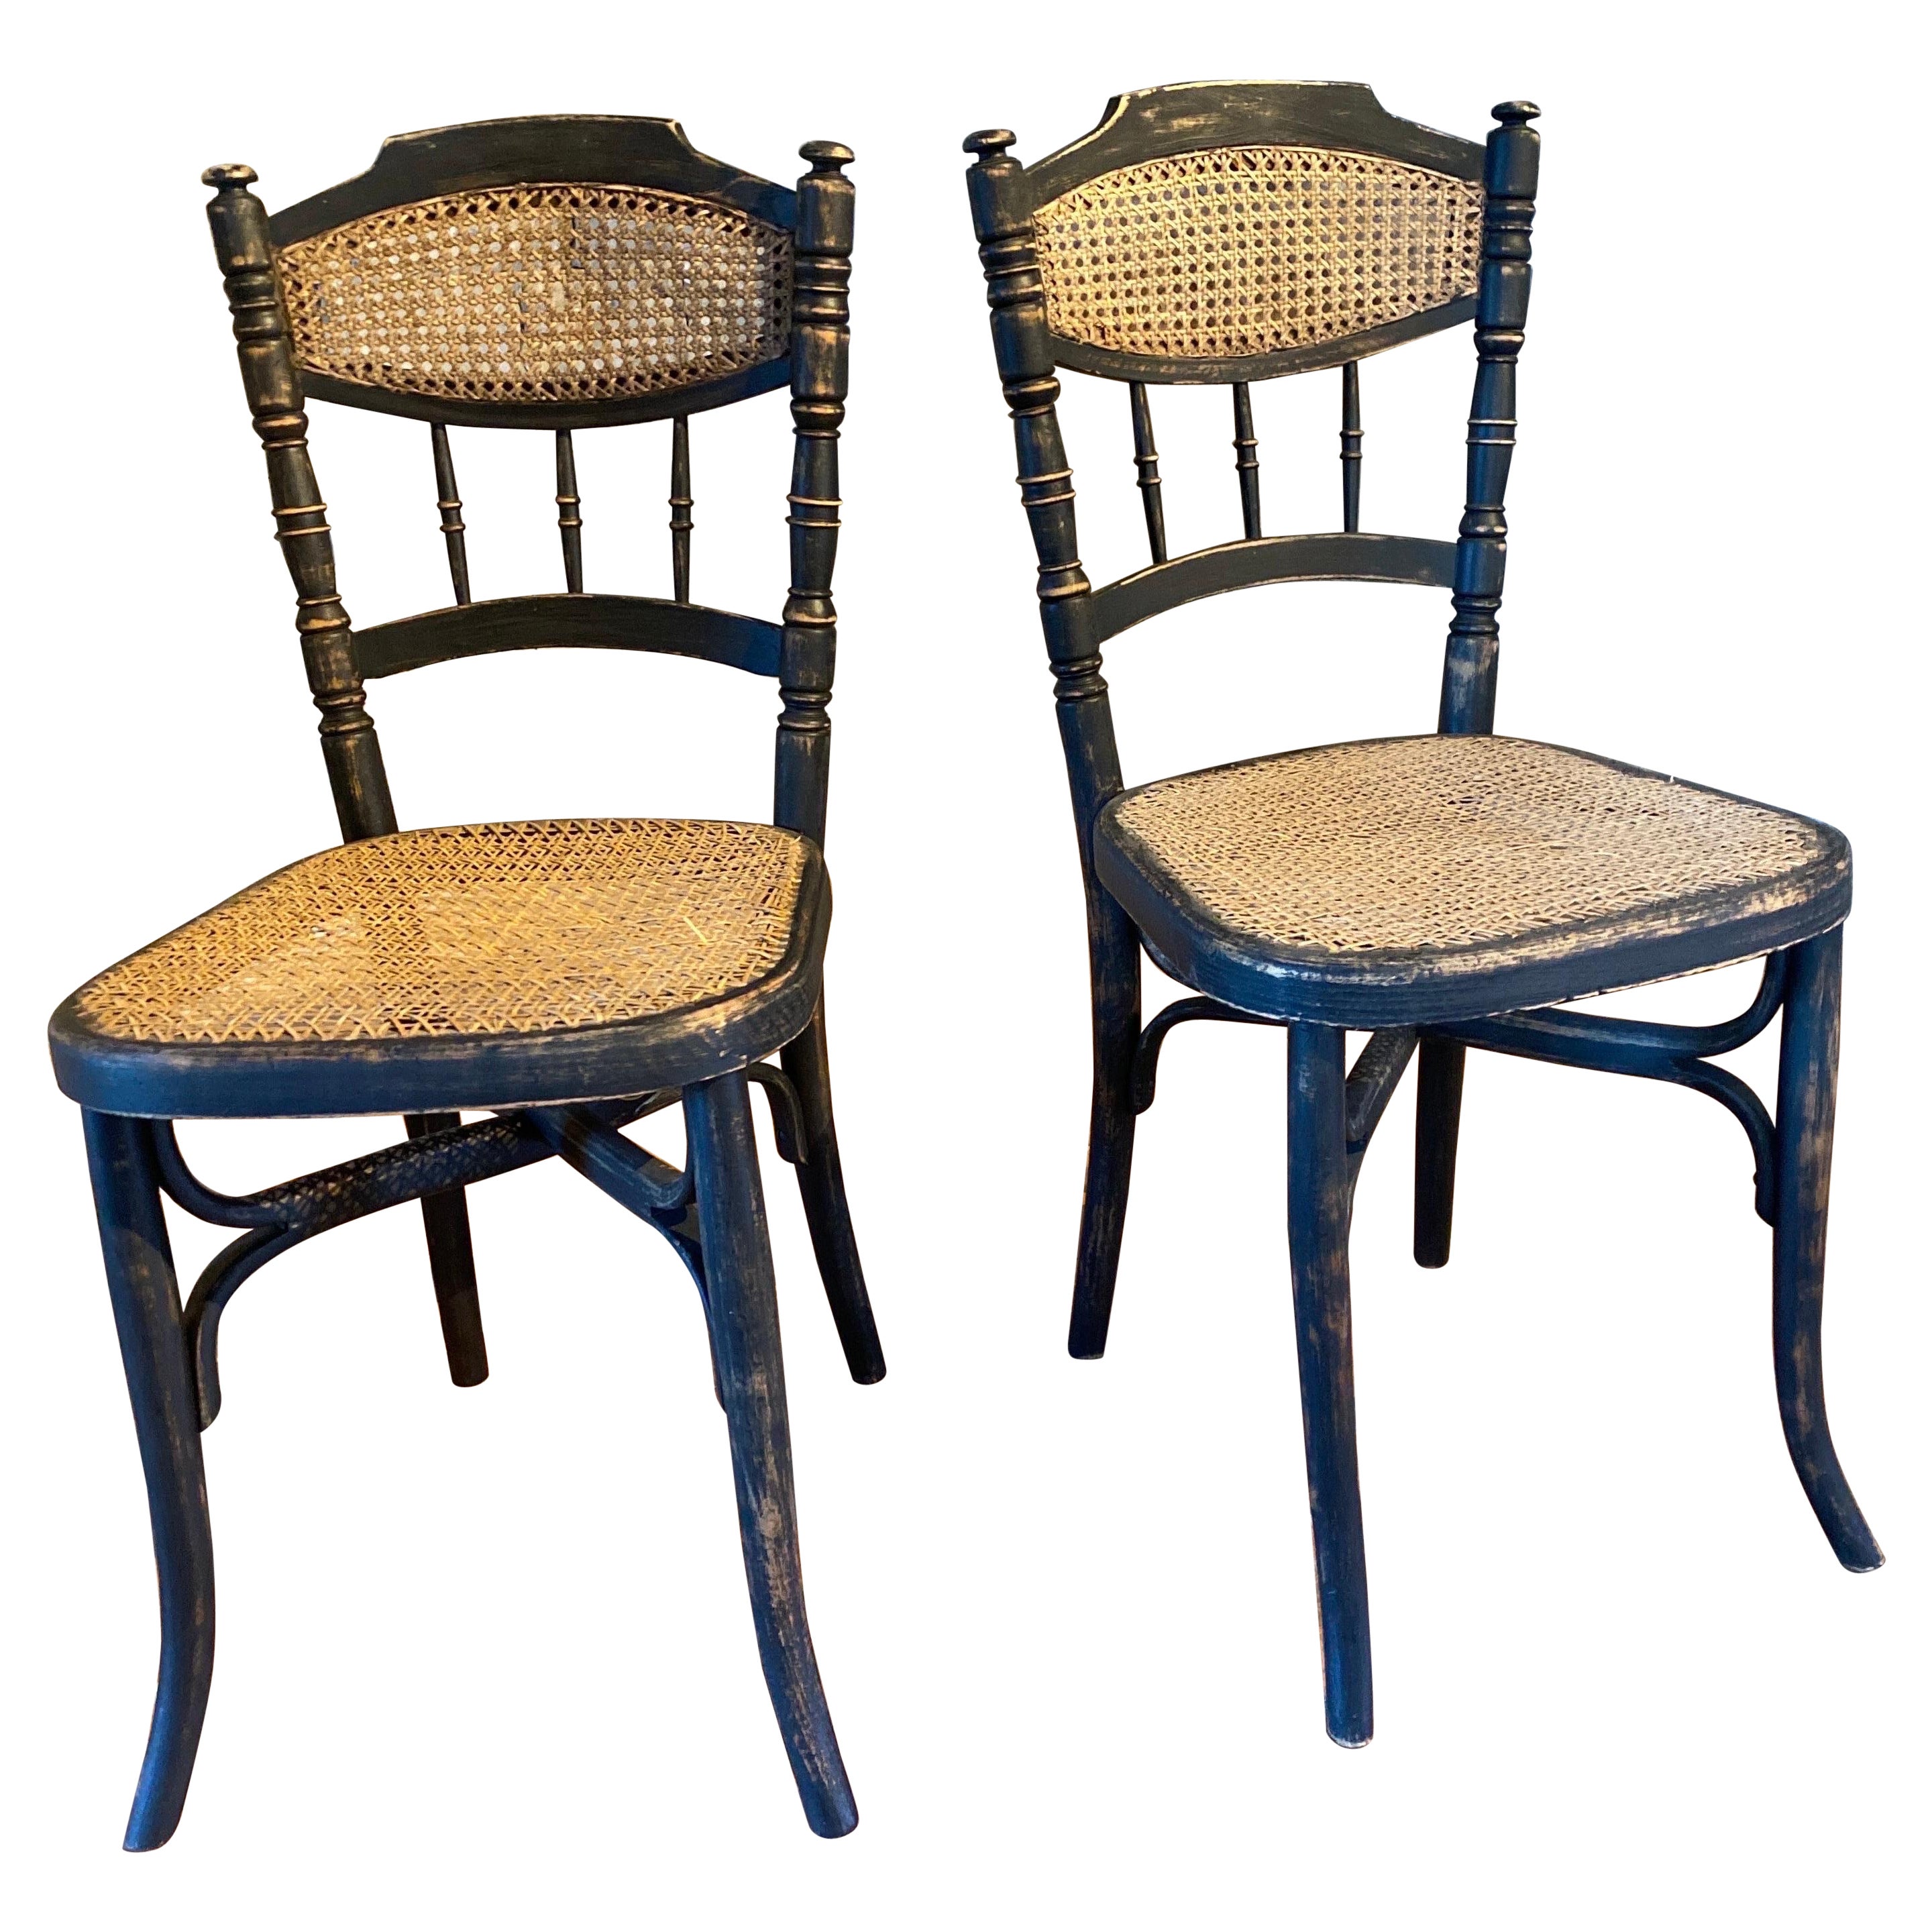 Pair of thonet style chairs year 1900